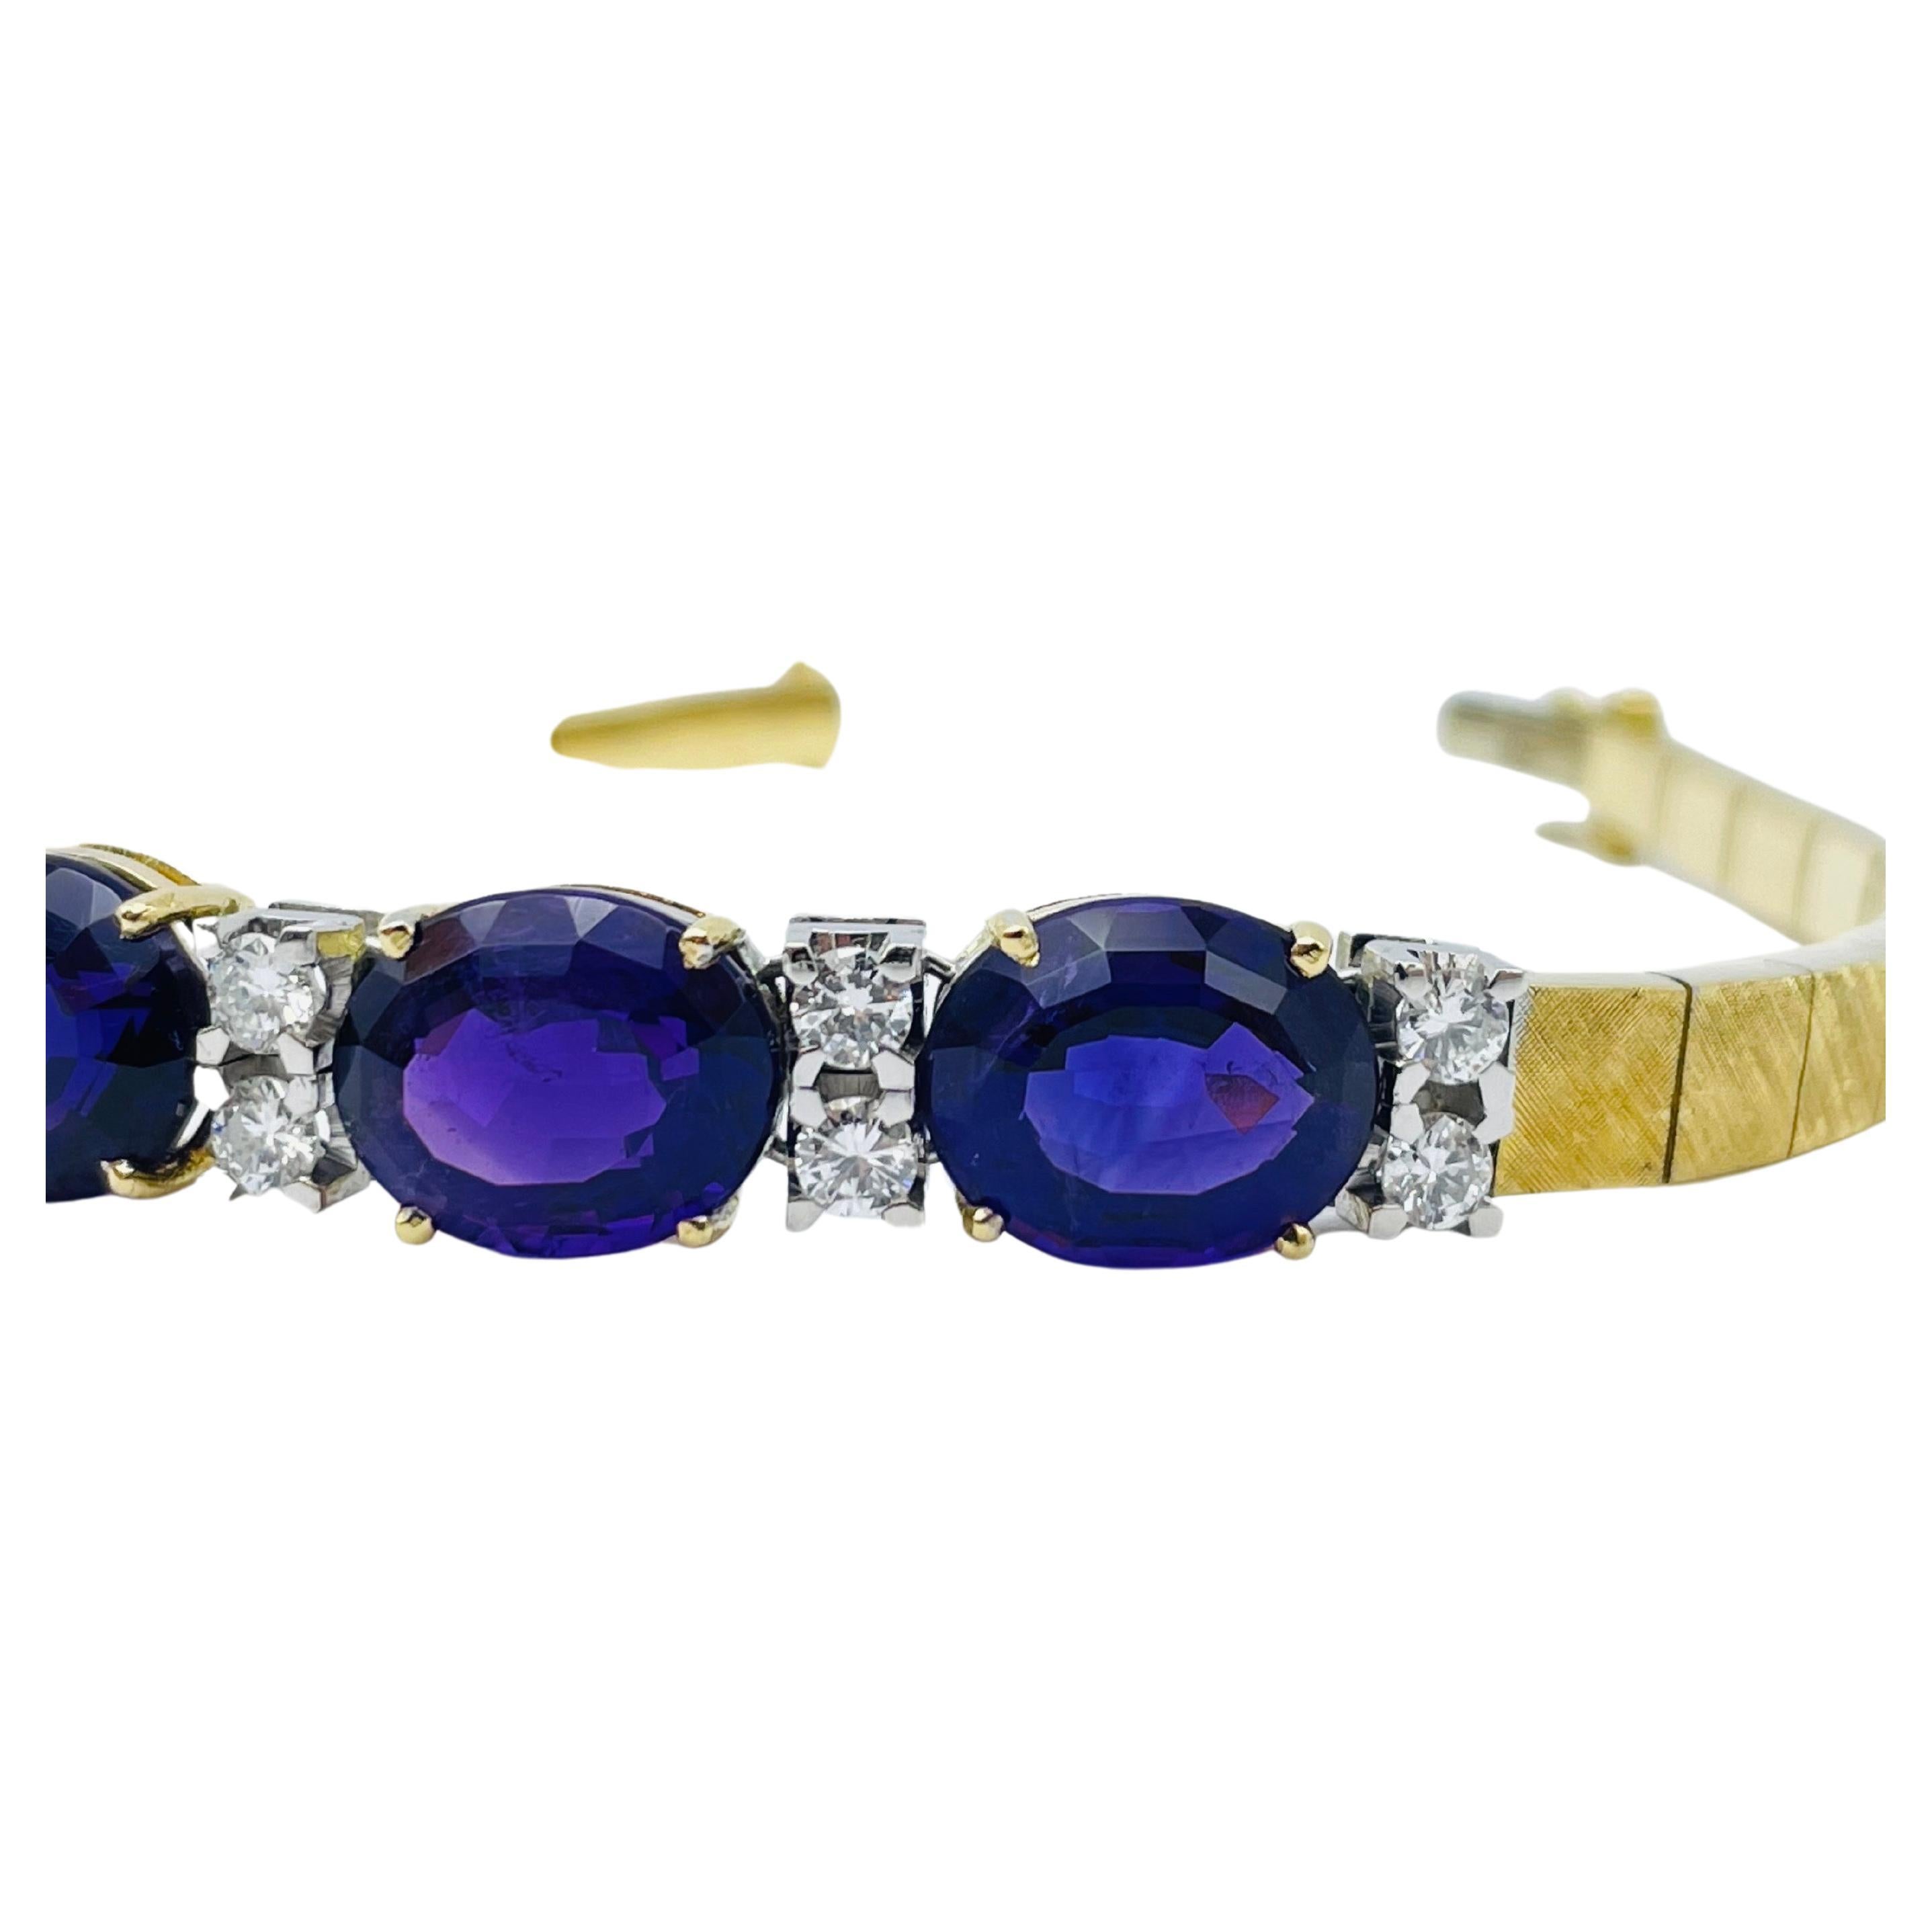 Noble Amethyst and Diamond Bracelet, 18k Yellow Gold and White Gold For Sale 2